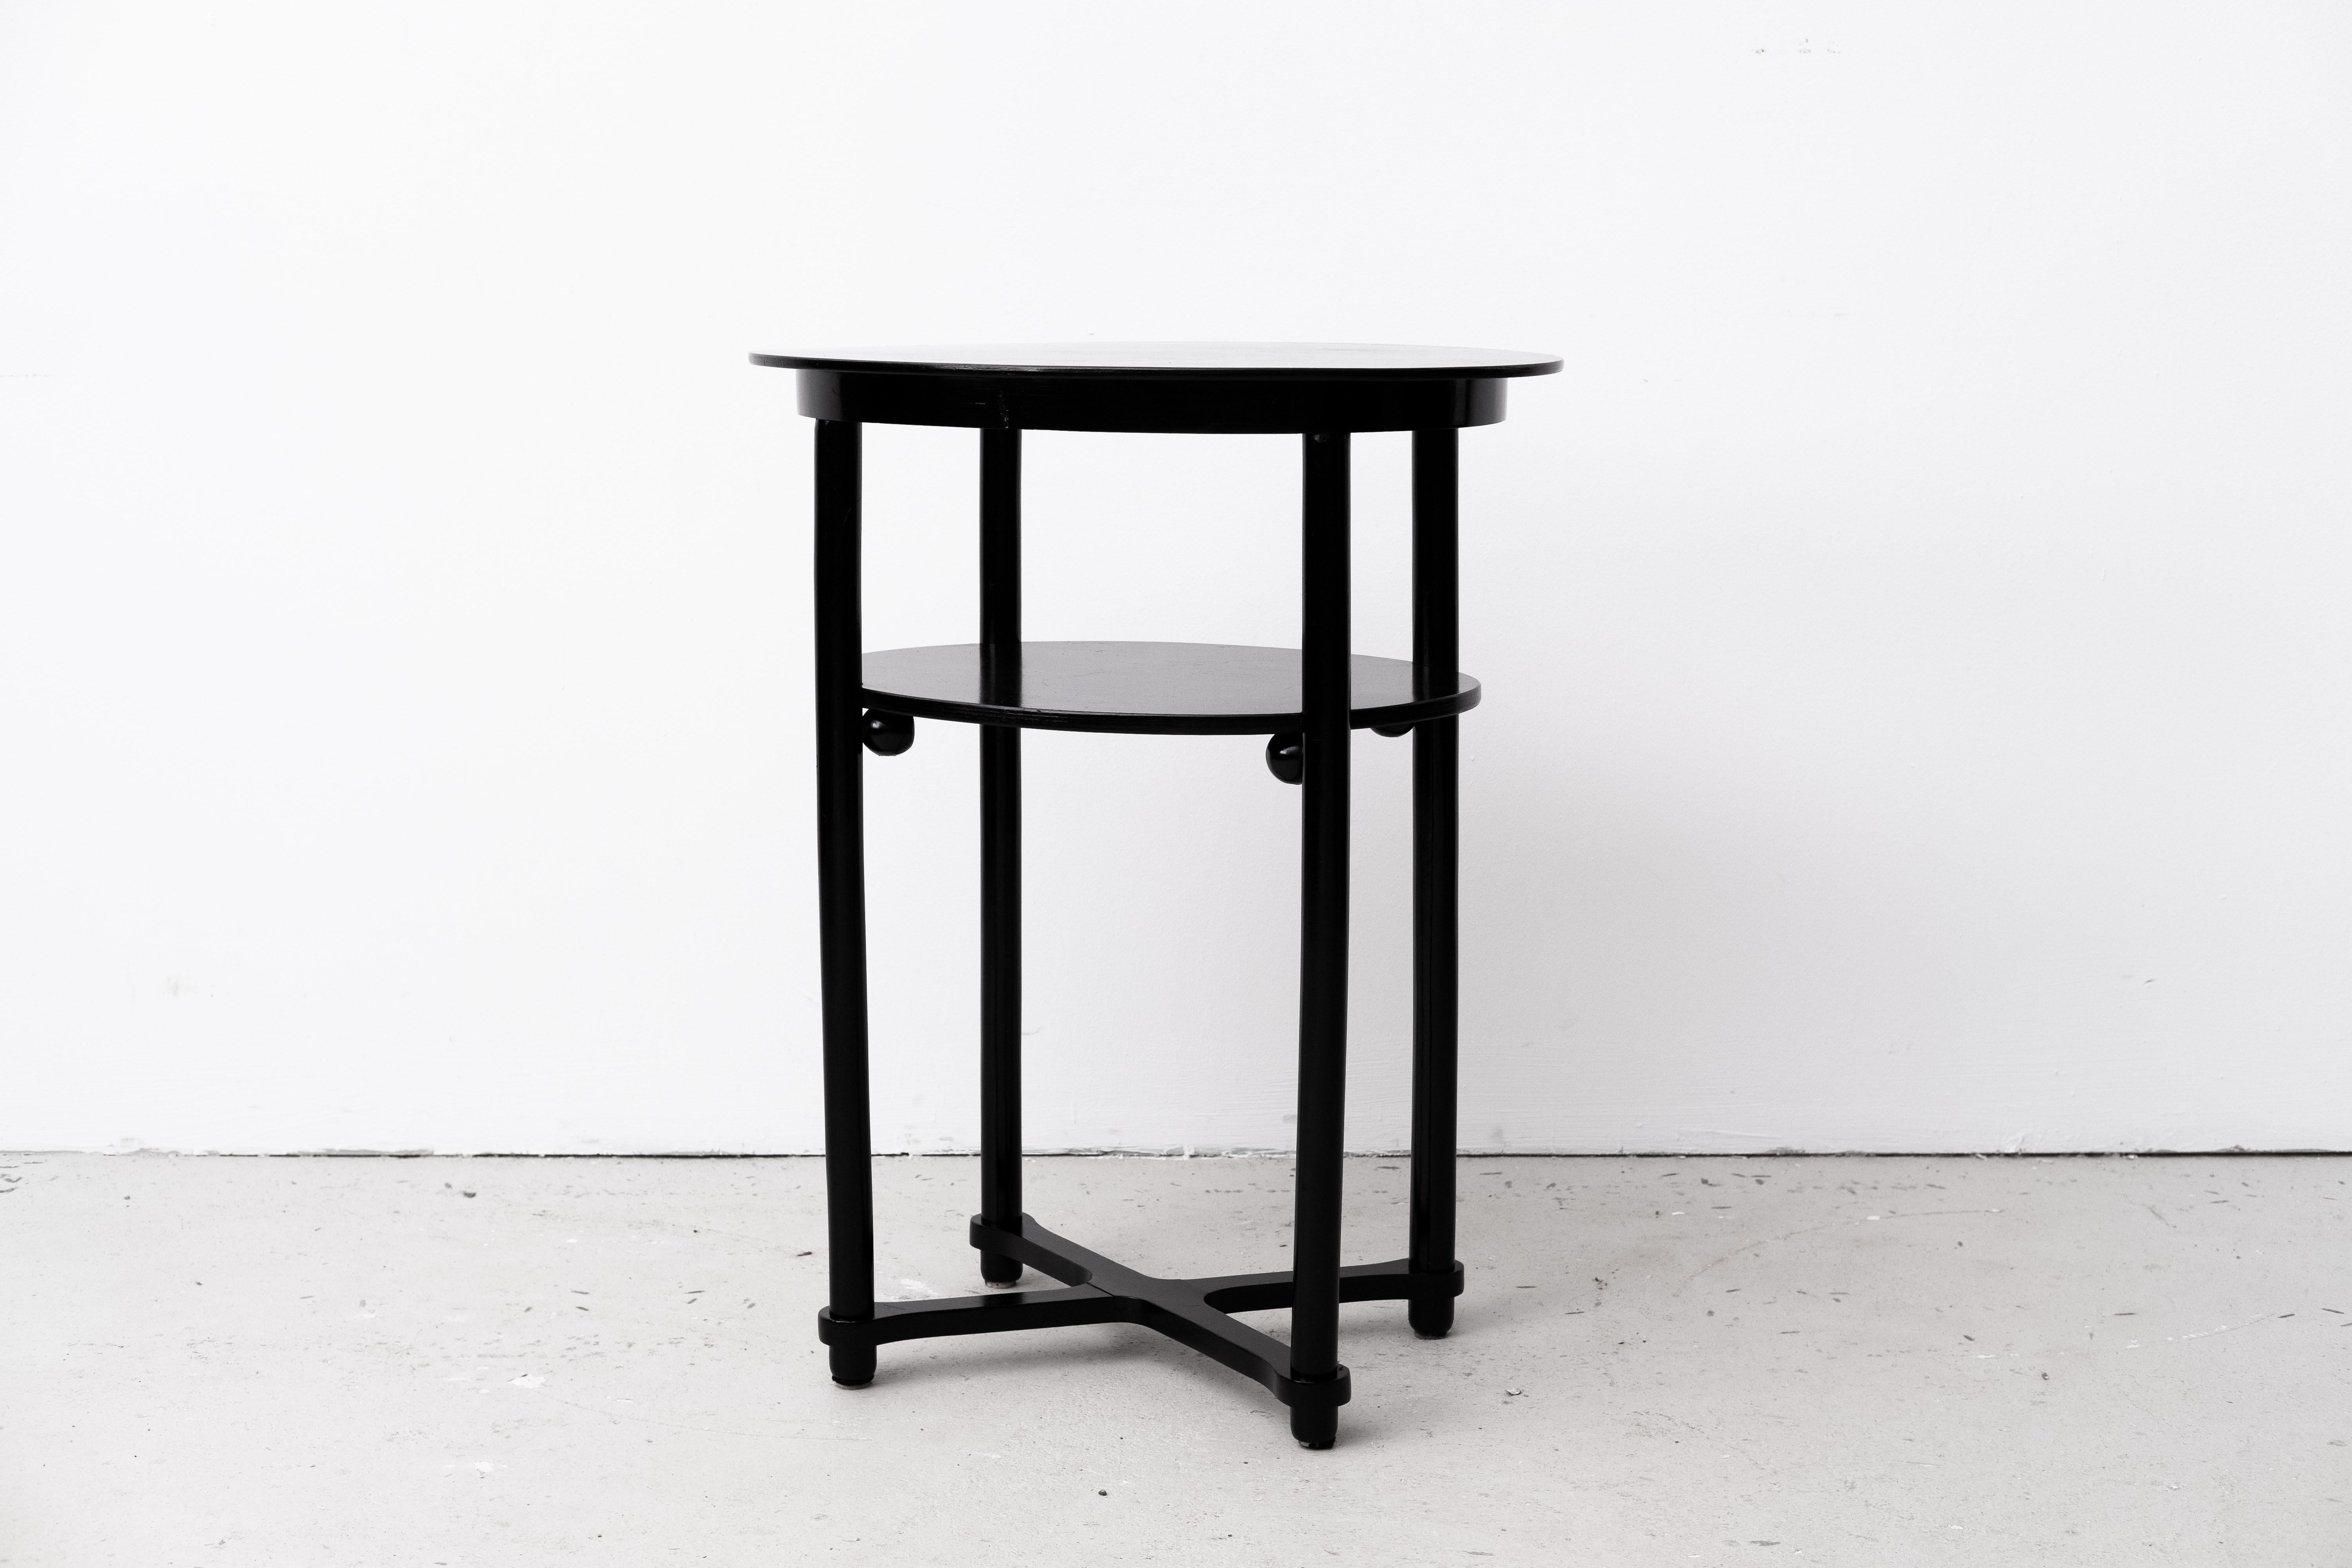 Secession Sidetable, attr. to J. Hoffmann, ex. by Fischel & Söhne (CZK, 1915) For Sale 5